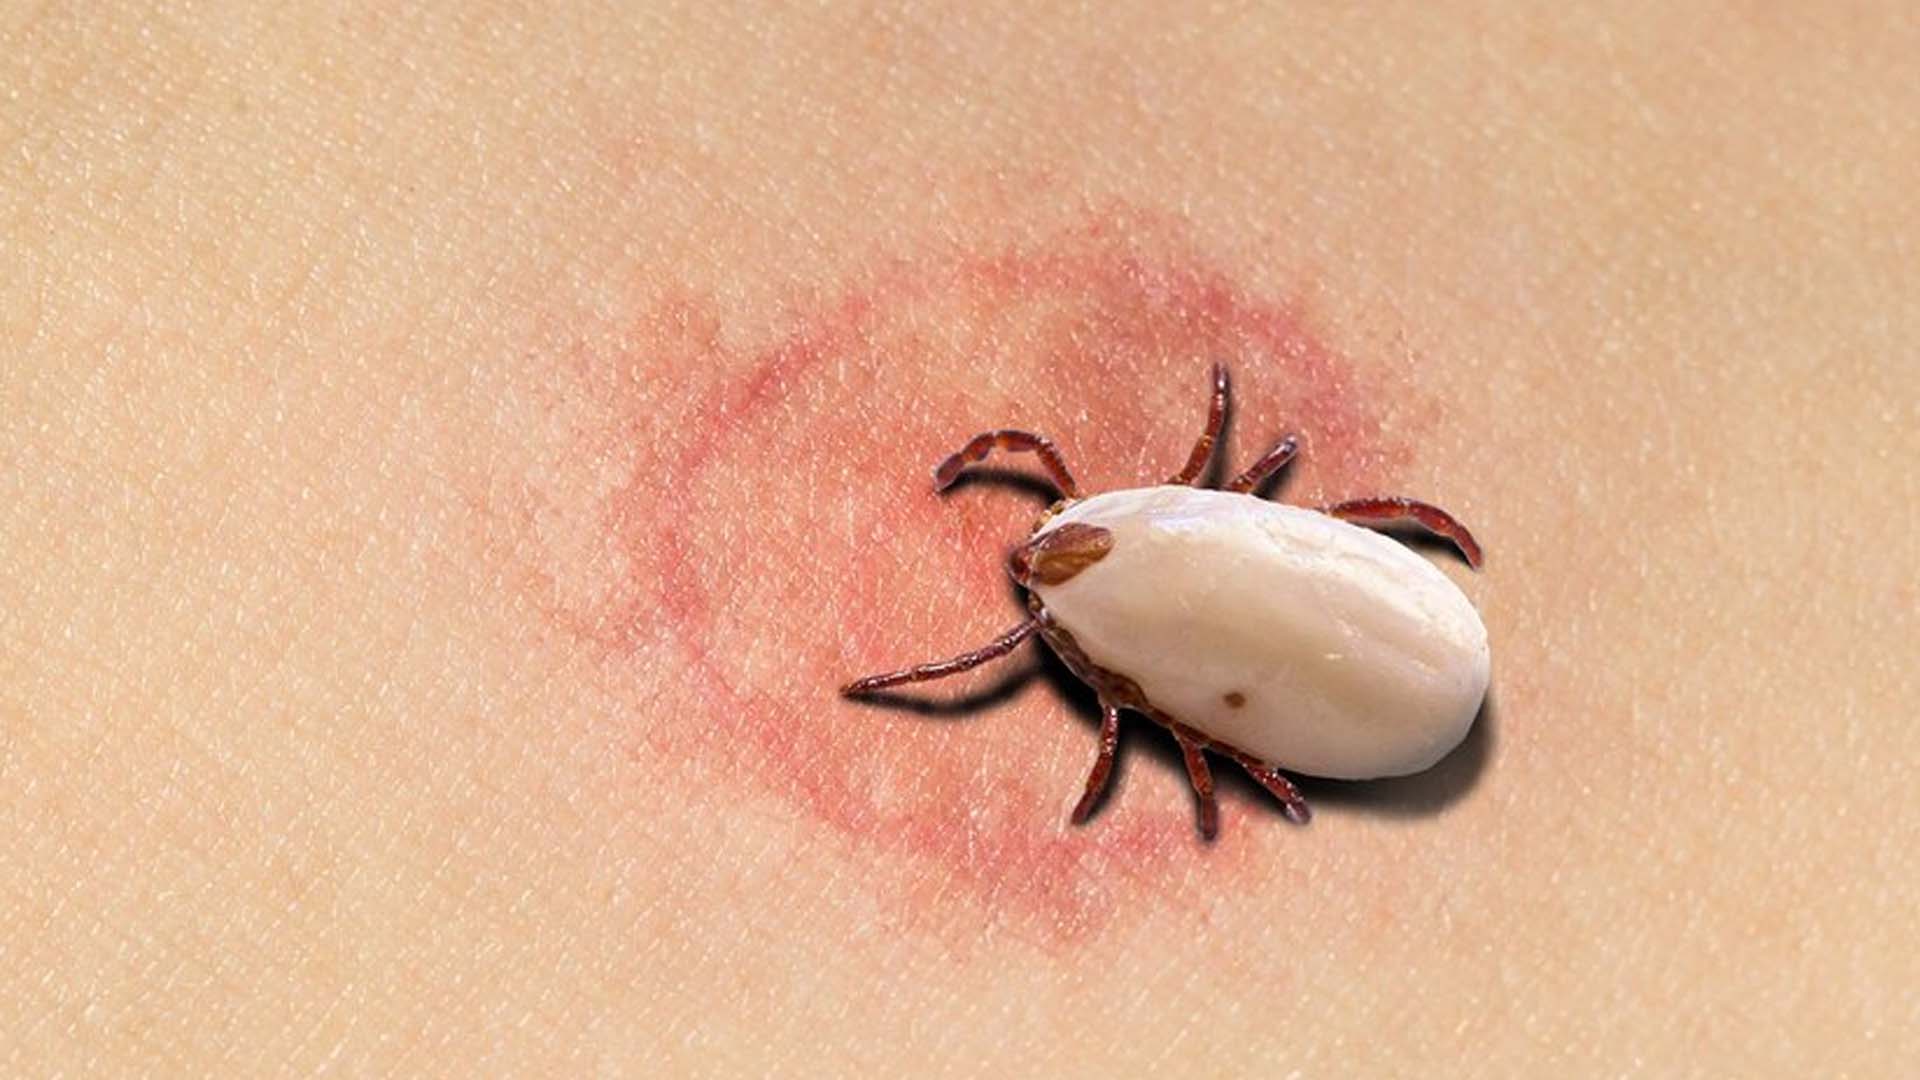 Lyme Disease: Symptoms, Causes, Treatments and Prevention